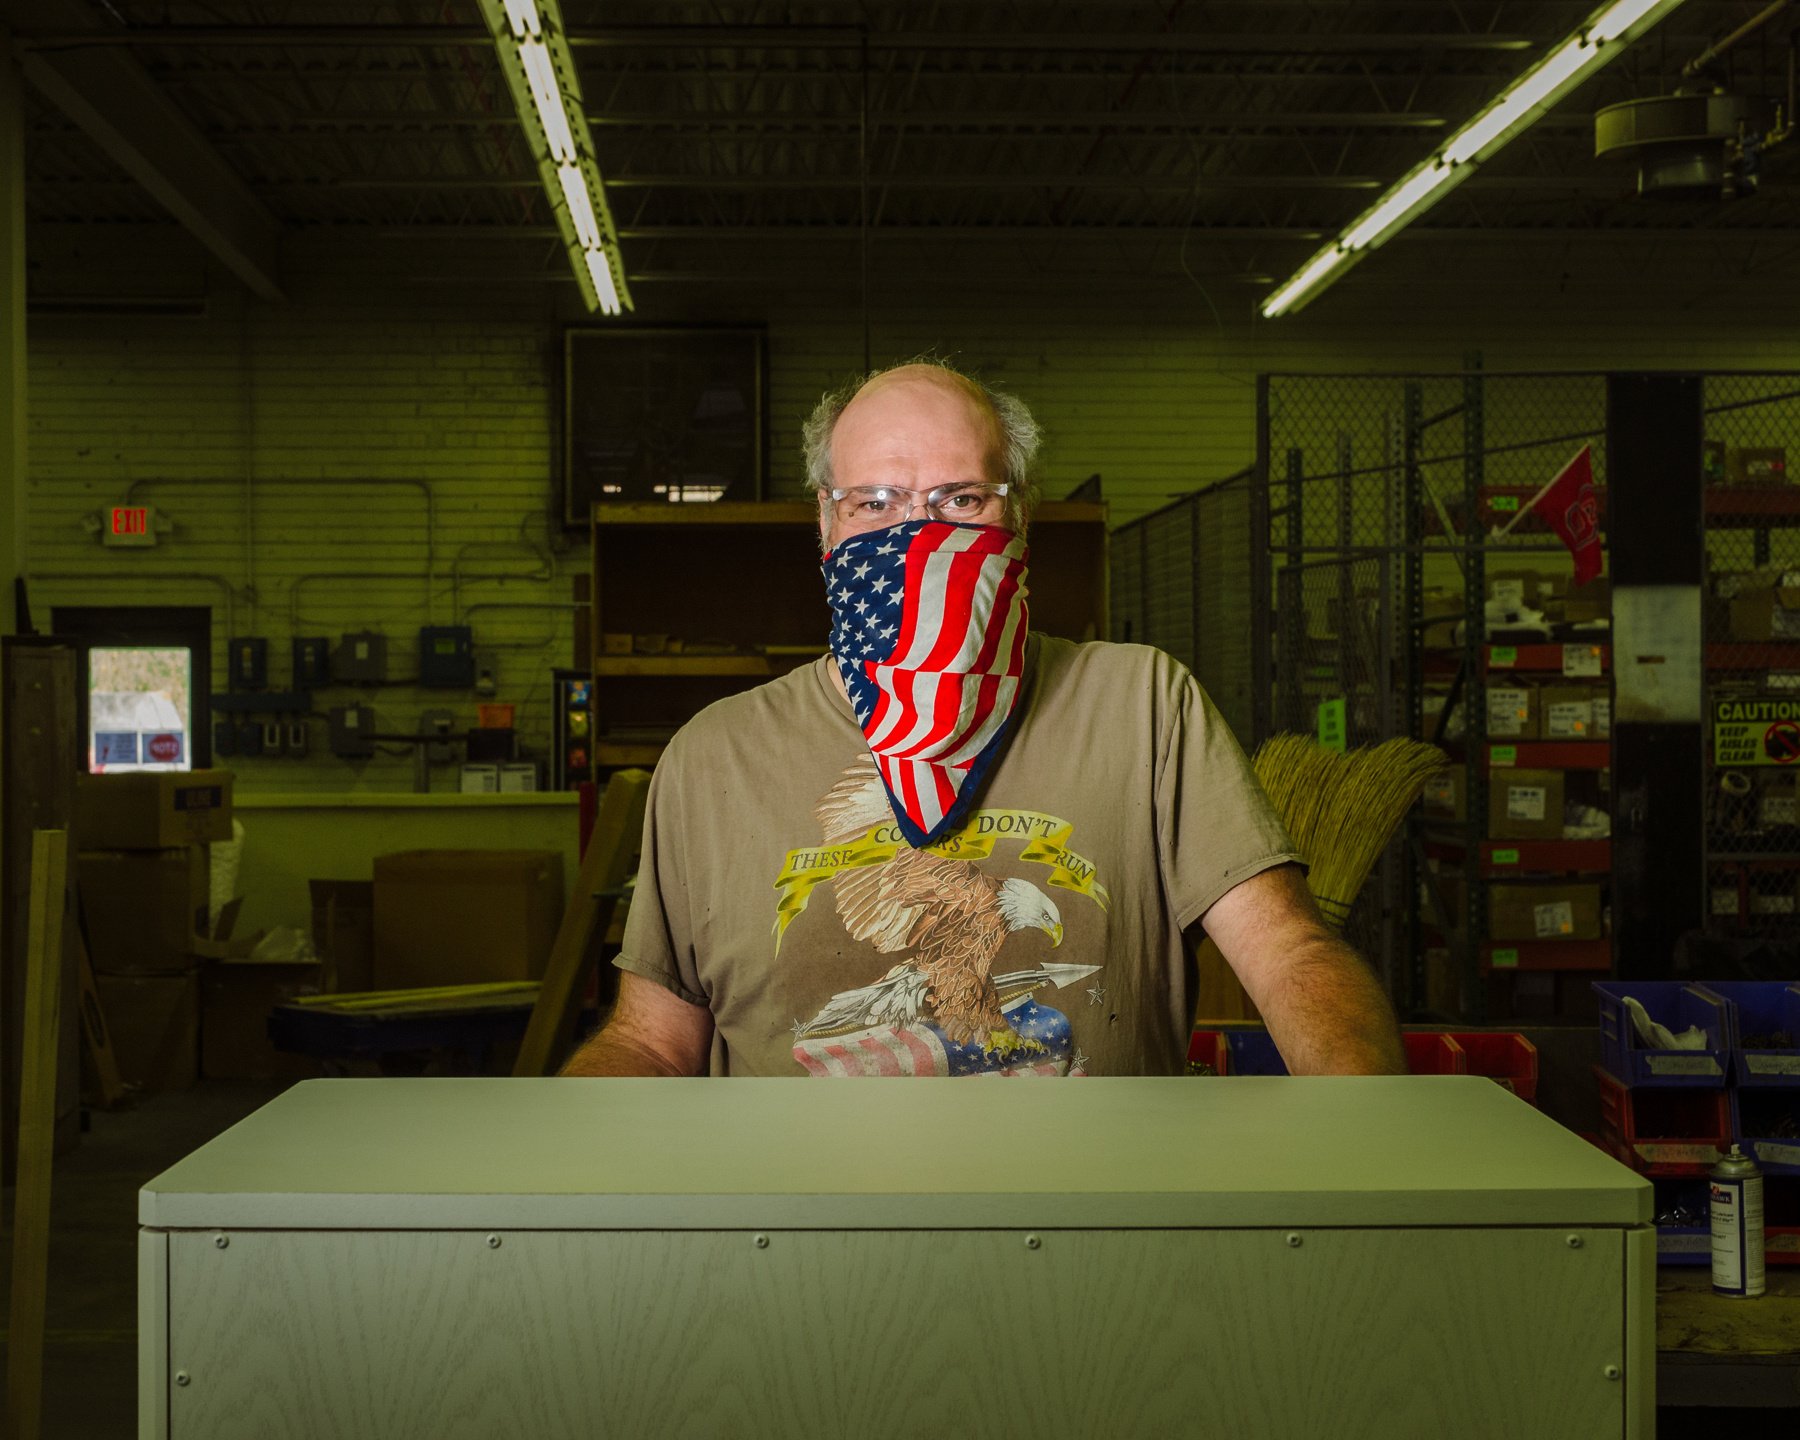 Ralph for The Wall Street Journal - A Furniture Maker's Five-Month Struggle With Covid